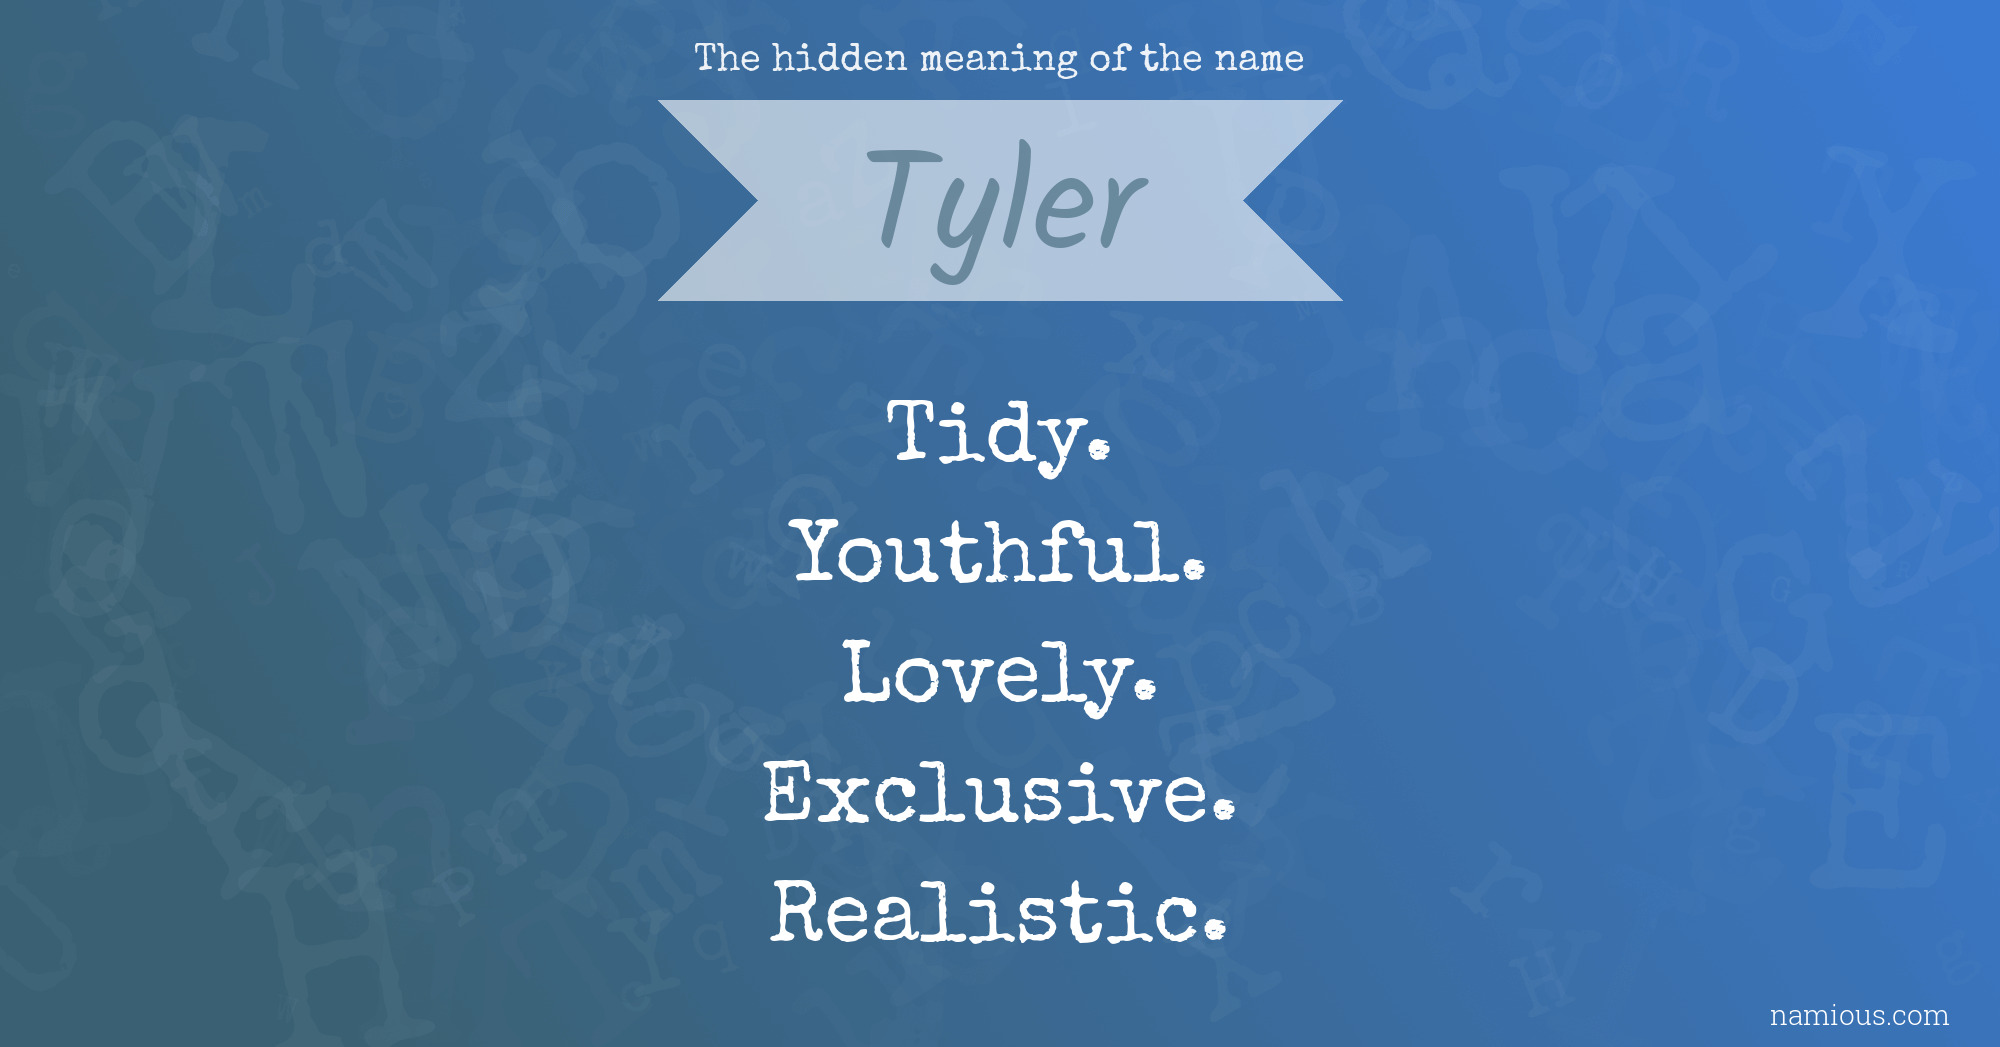 The hidden meaning of the name Tyler